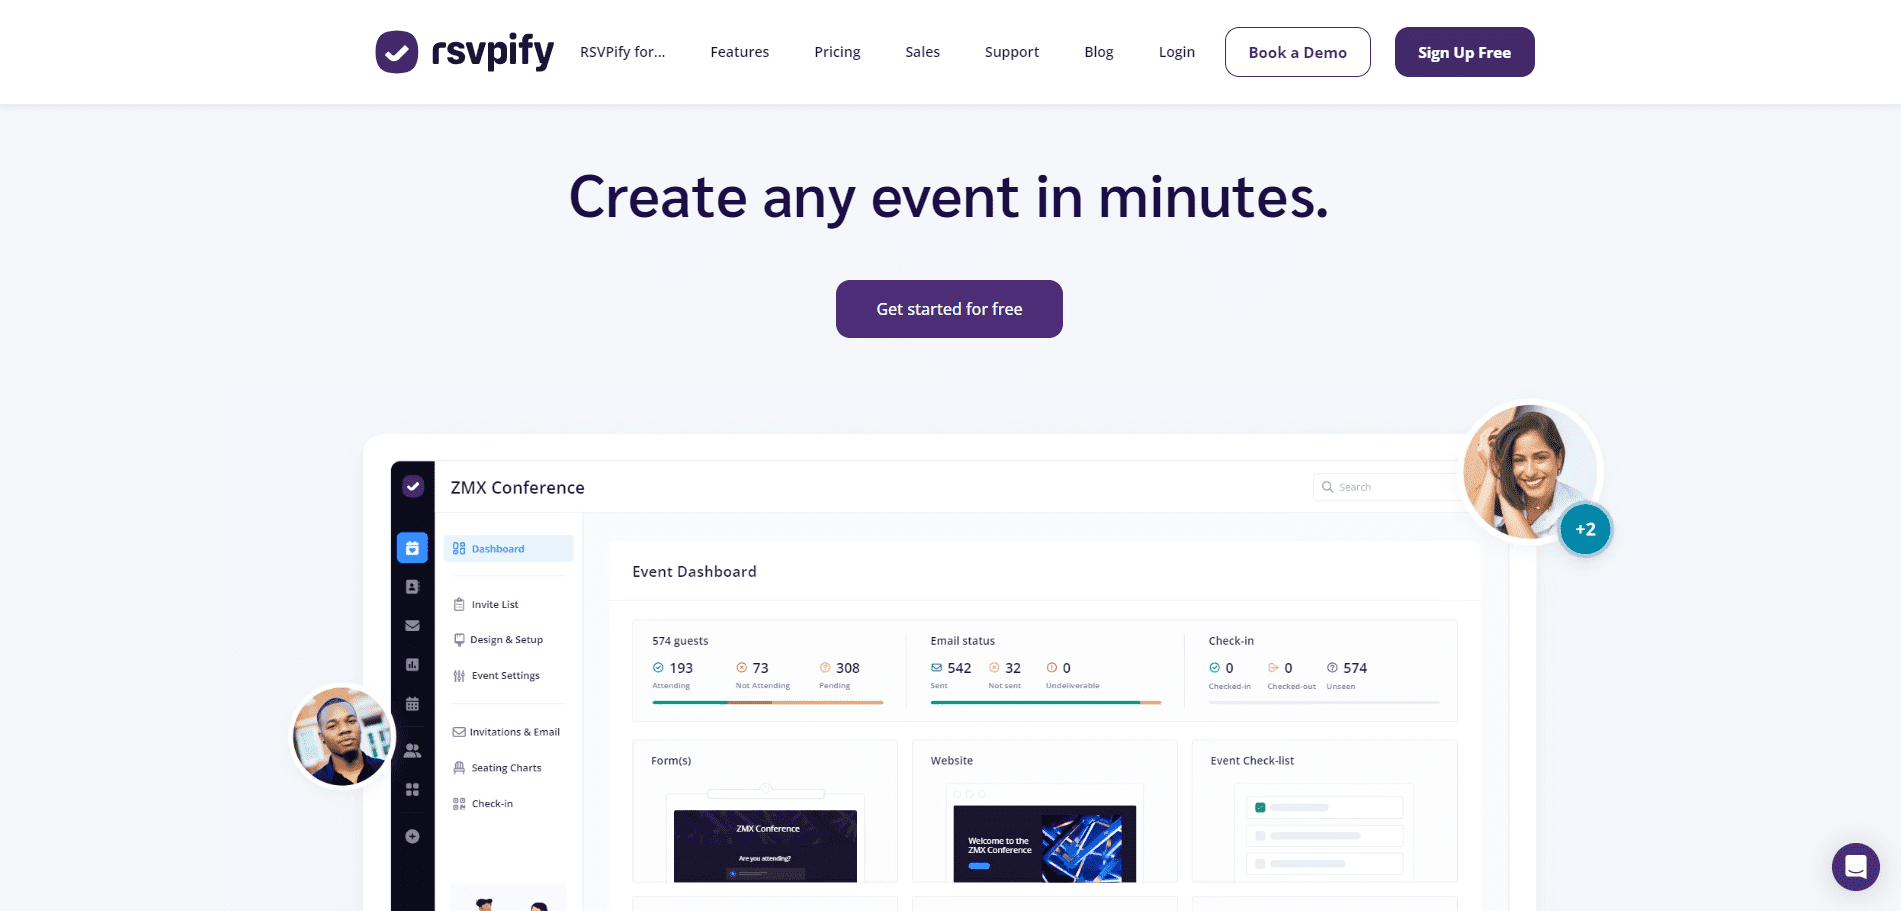 RSVPify's homepage